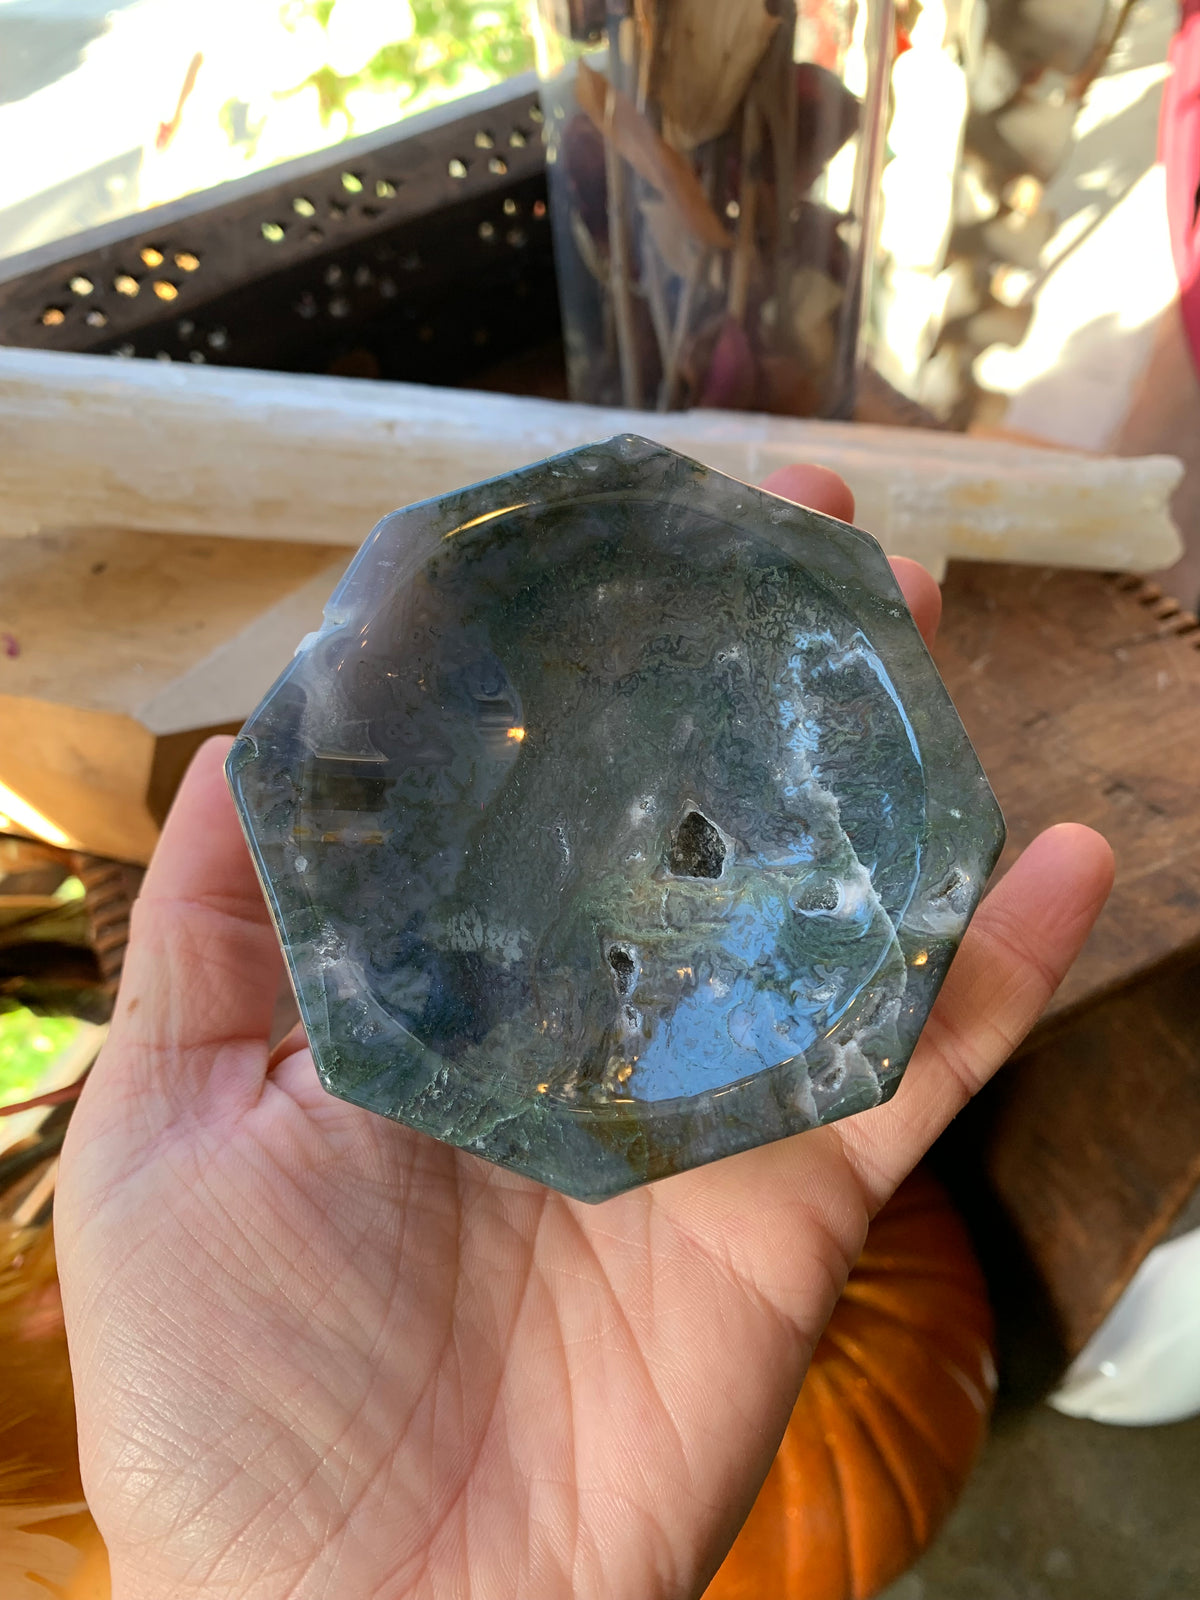 Witch's Way Craft Moss Agate Bowl